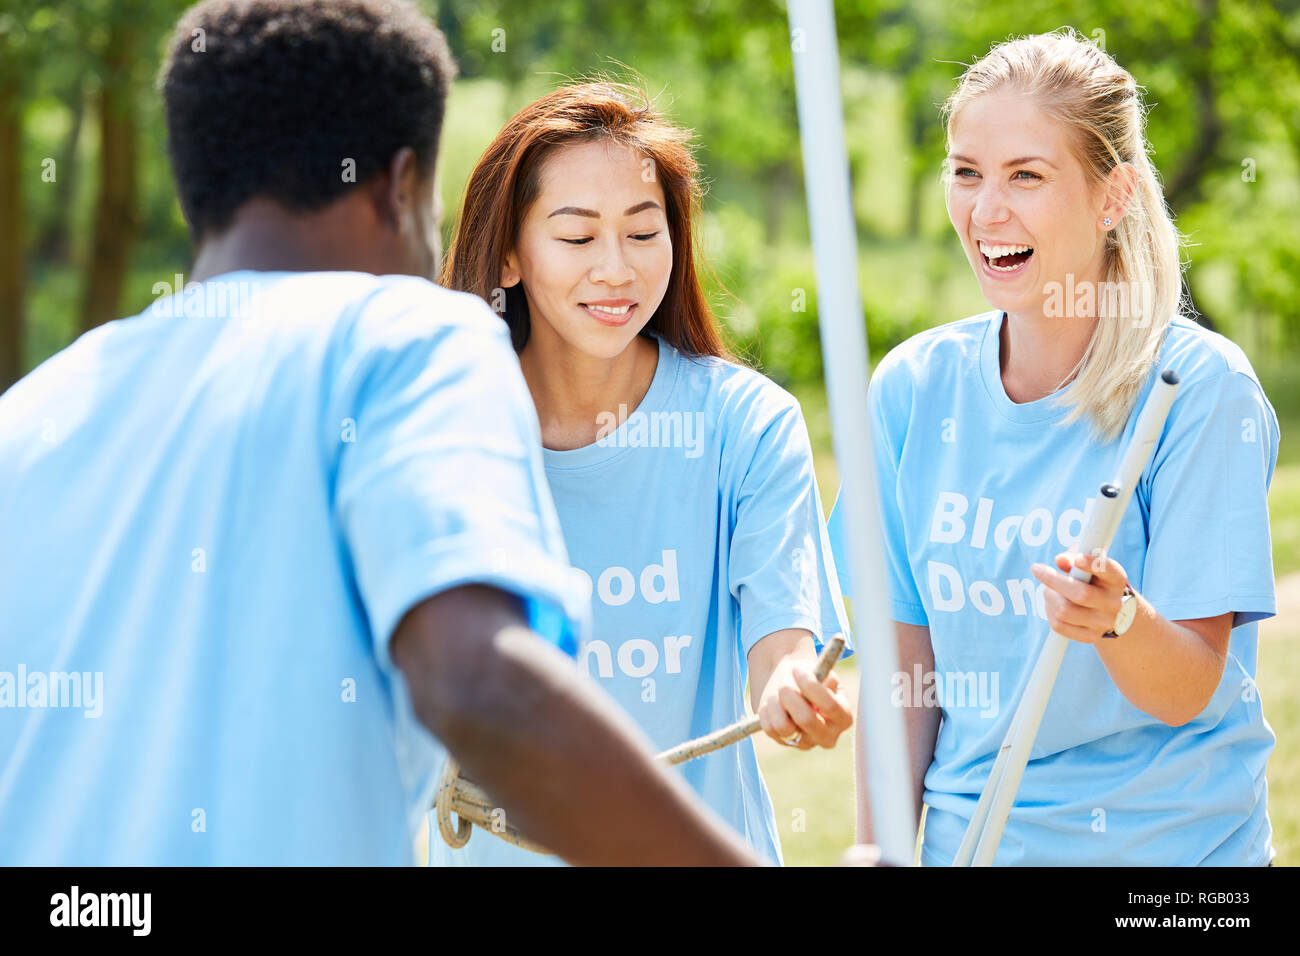 Three young people together build up an action stand for the blood donation service Stock Photo